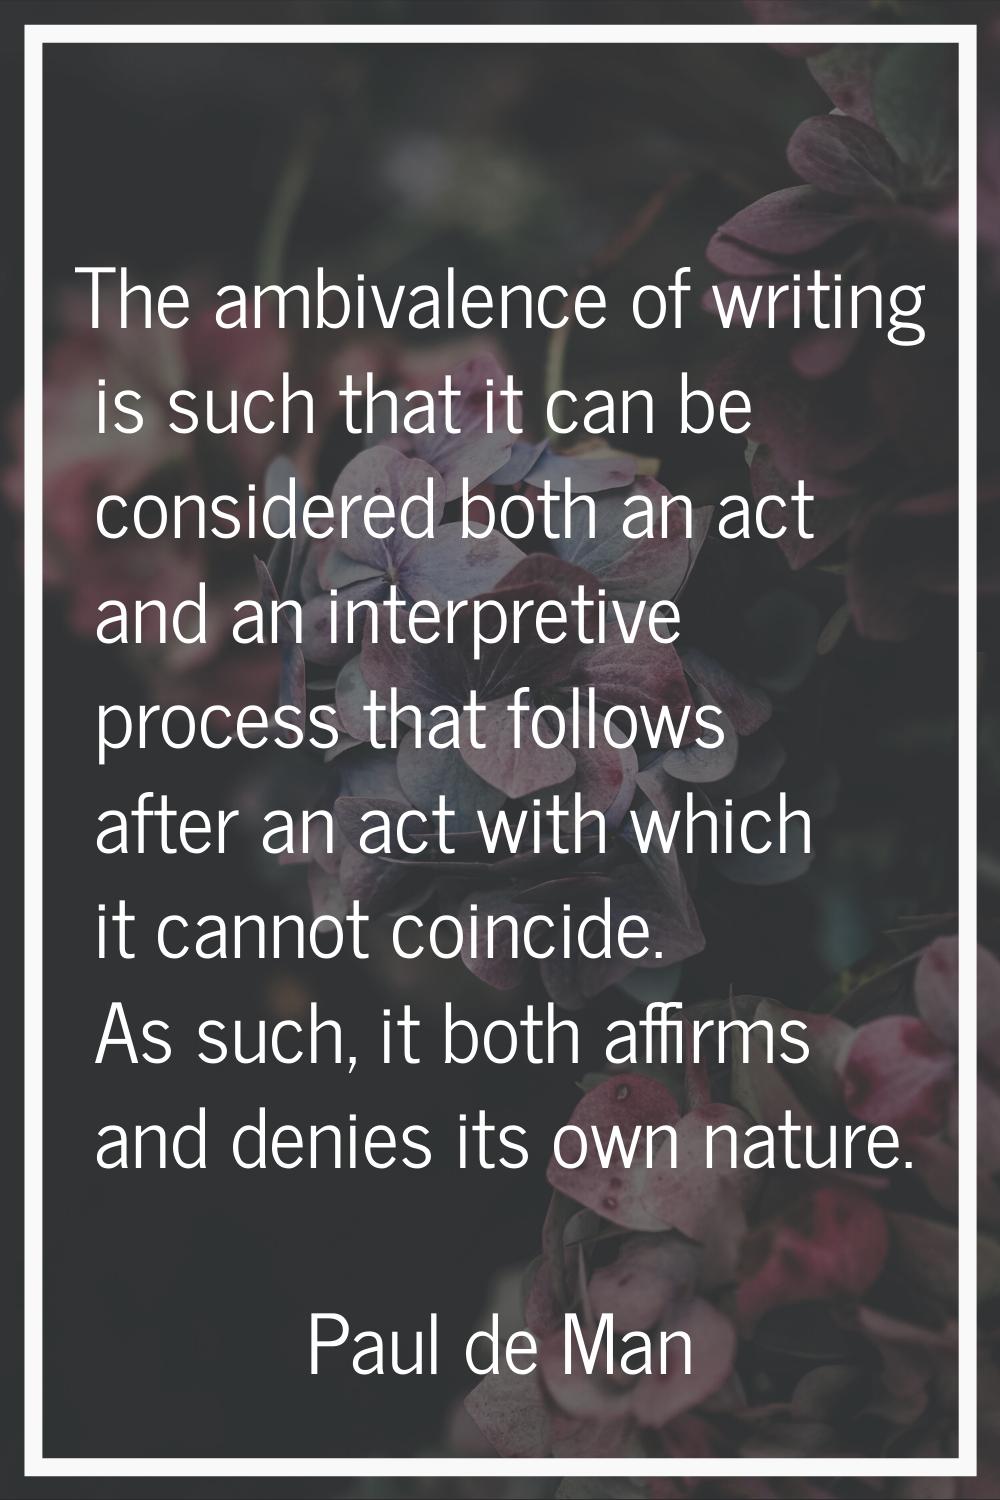 The ambivalence of writing is such that it can be considered both an act and an interpretive proces